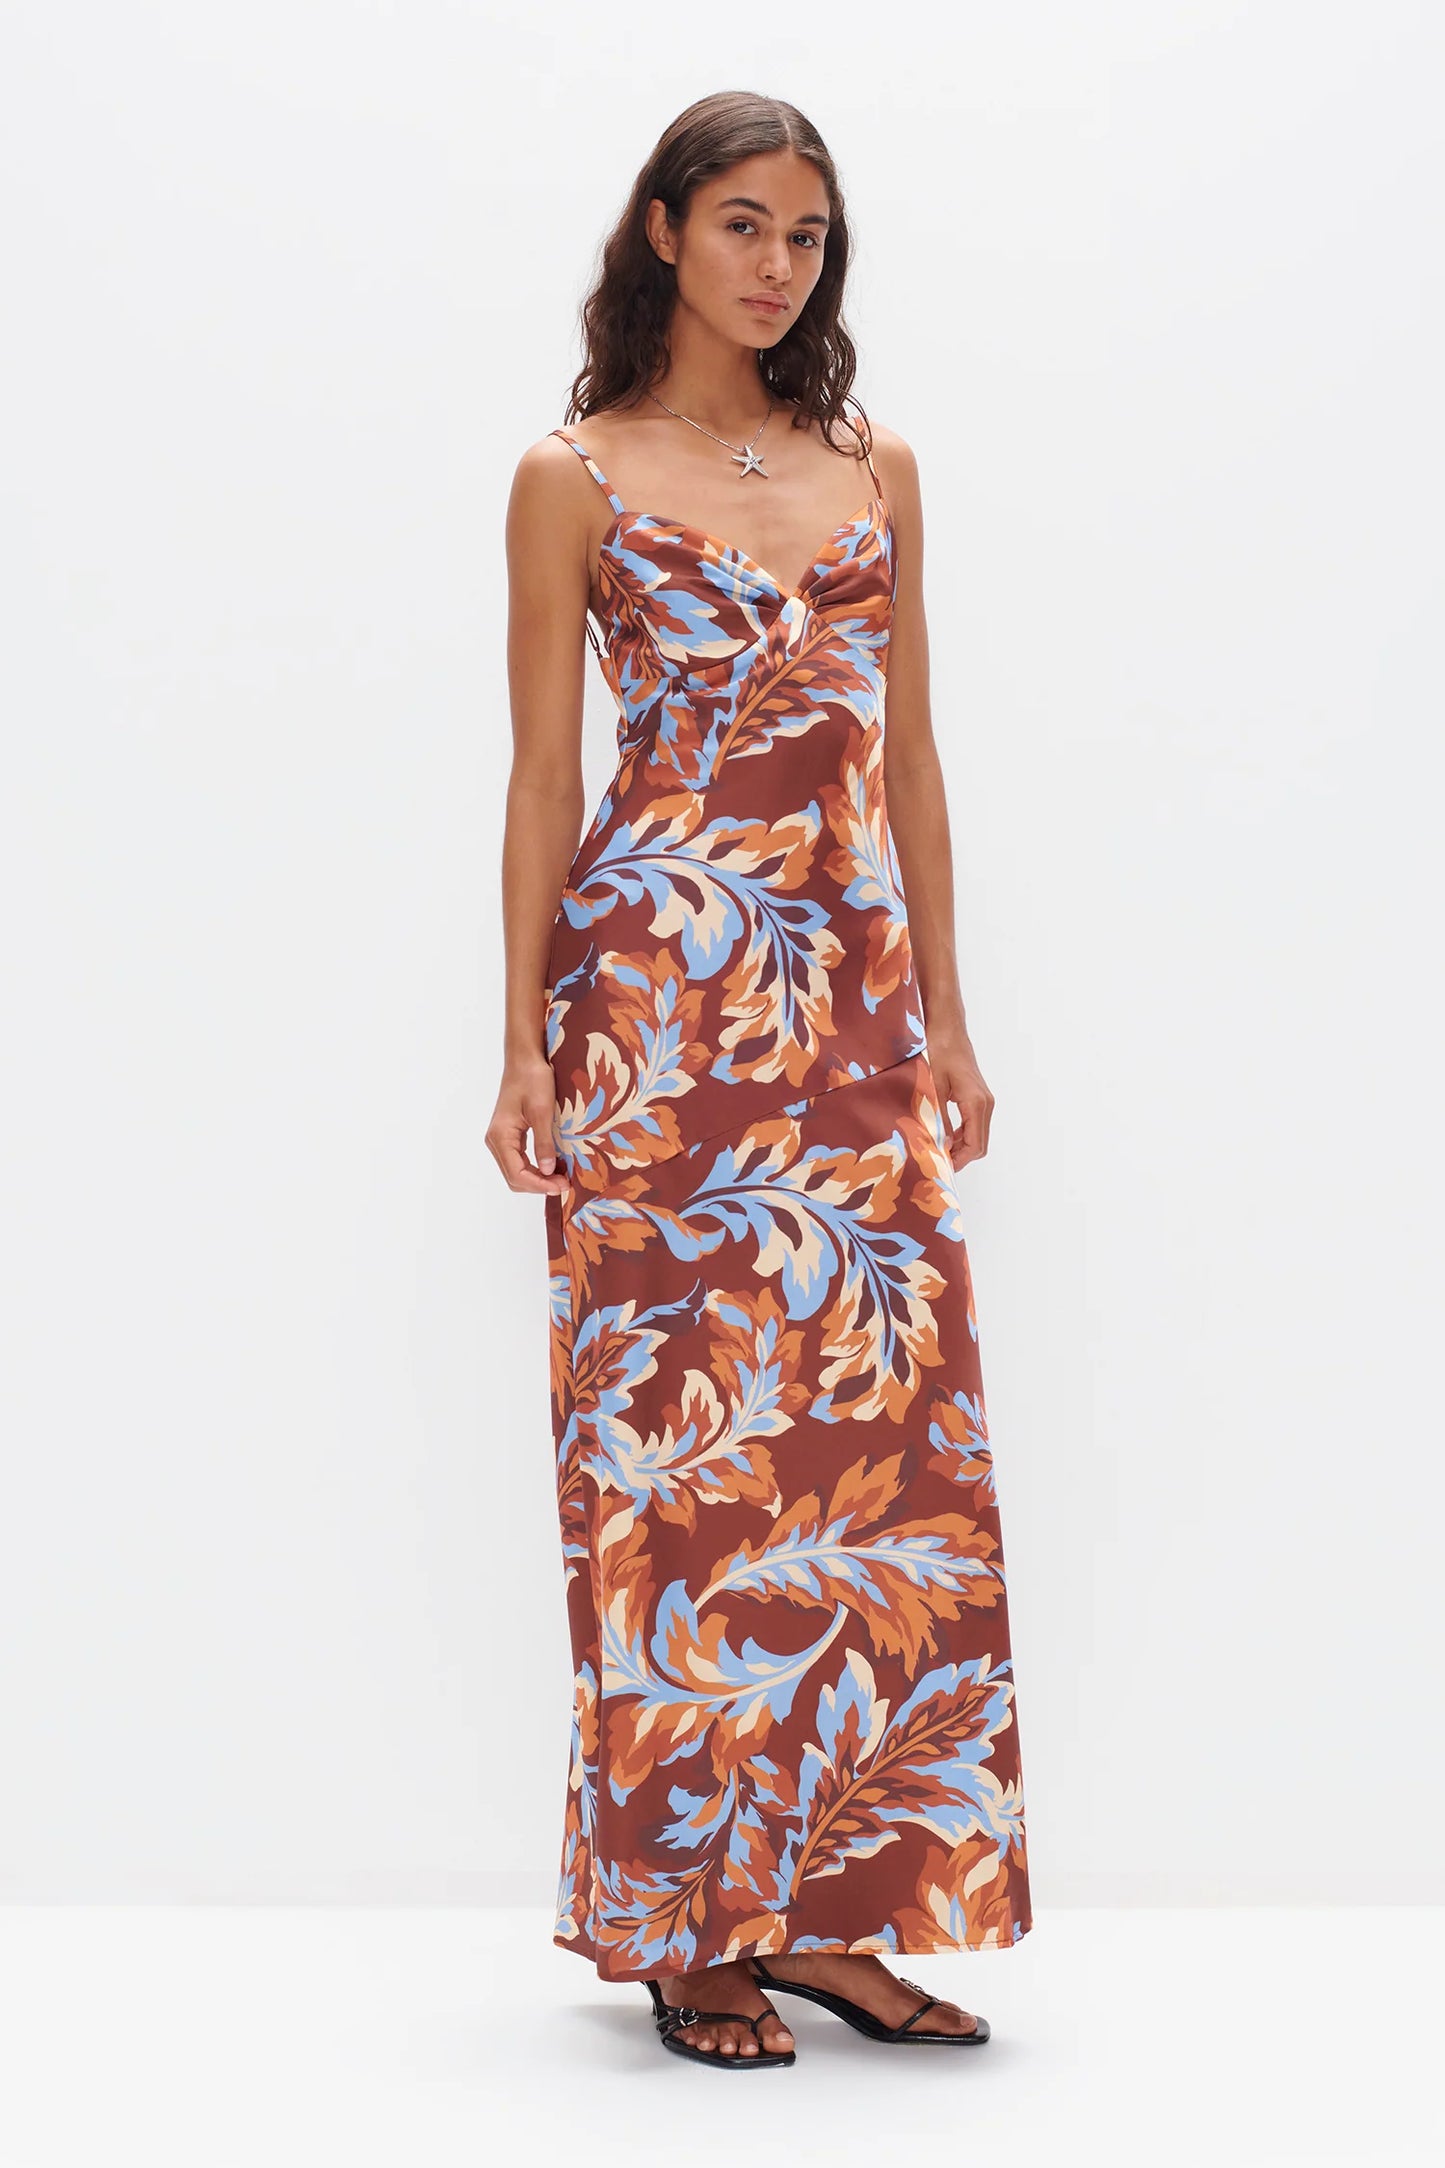 The Flora Dress by OWNLEY is one of the most flattering maxi's to date! The dress features gathered bust cups, adjustable shoulder straps and back strap detail, asymmetric seam to create the most flattering shape on the body. In the stunning Retro Leaf print, you can't go past this beautiful dress.